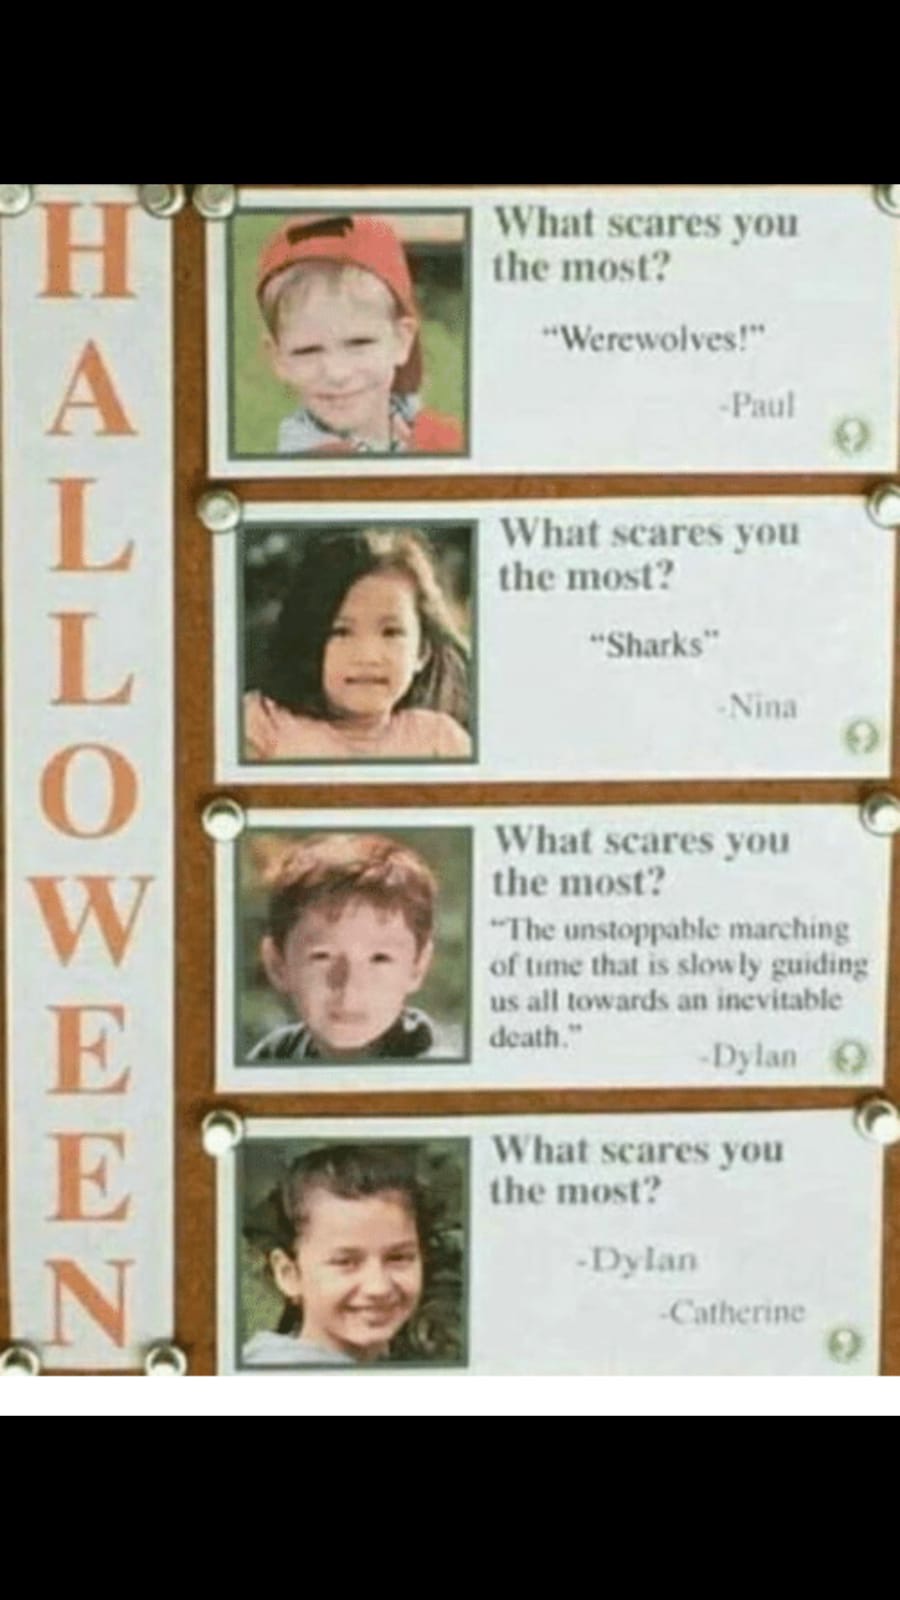 scares you the most meme dylan - What scares you the most? "Werewolves!" Paul What scares you the most? "Sharks" Nina What scares you the most? The unstoppable marching of time that is slowly guiding us all towards an inevitable death." Dylan What scares 